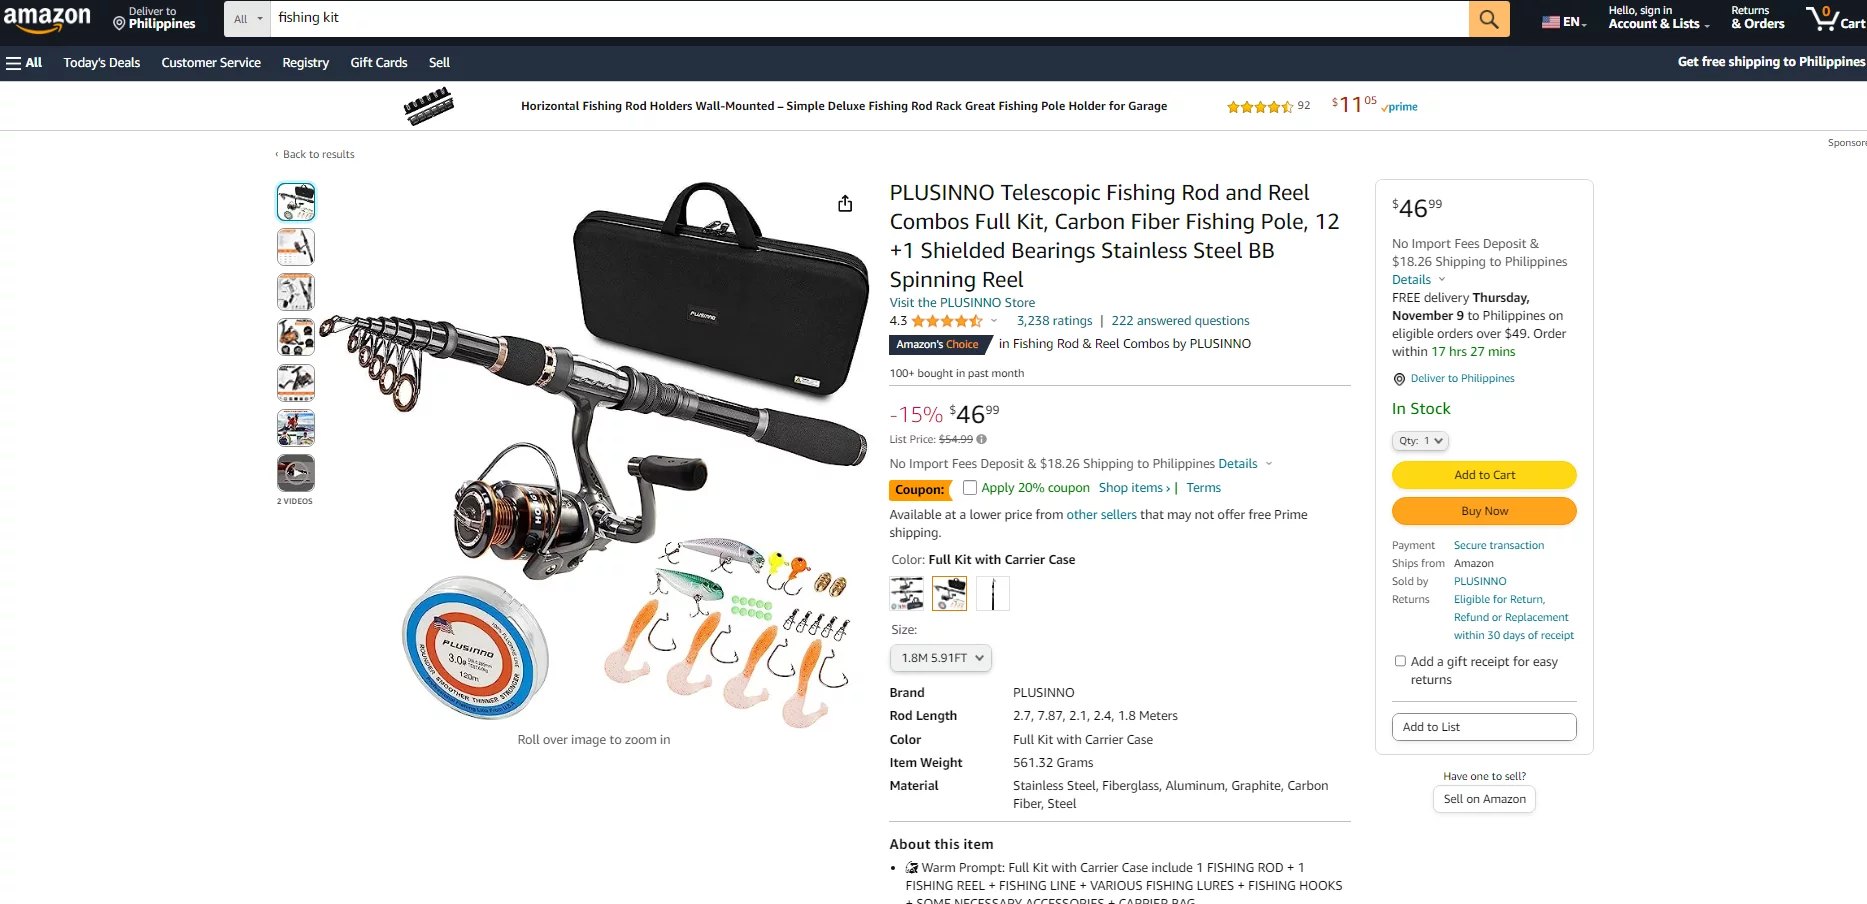 Best Fishing Accessories Dropshipping Products 7: Fishing Accessories Kits